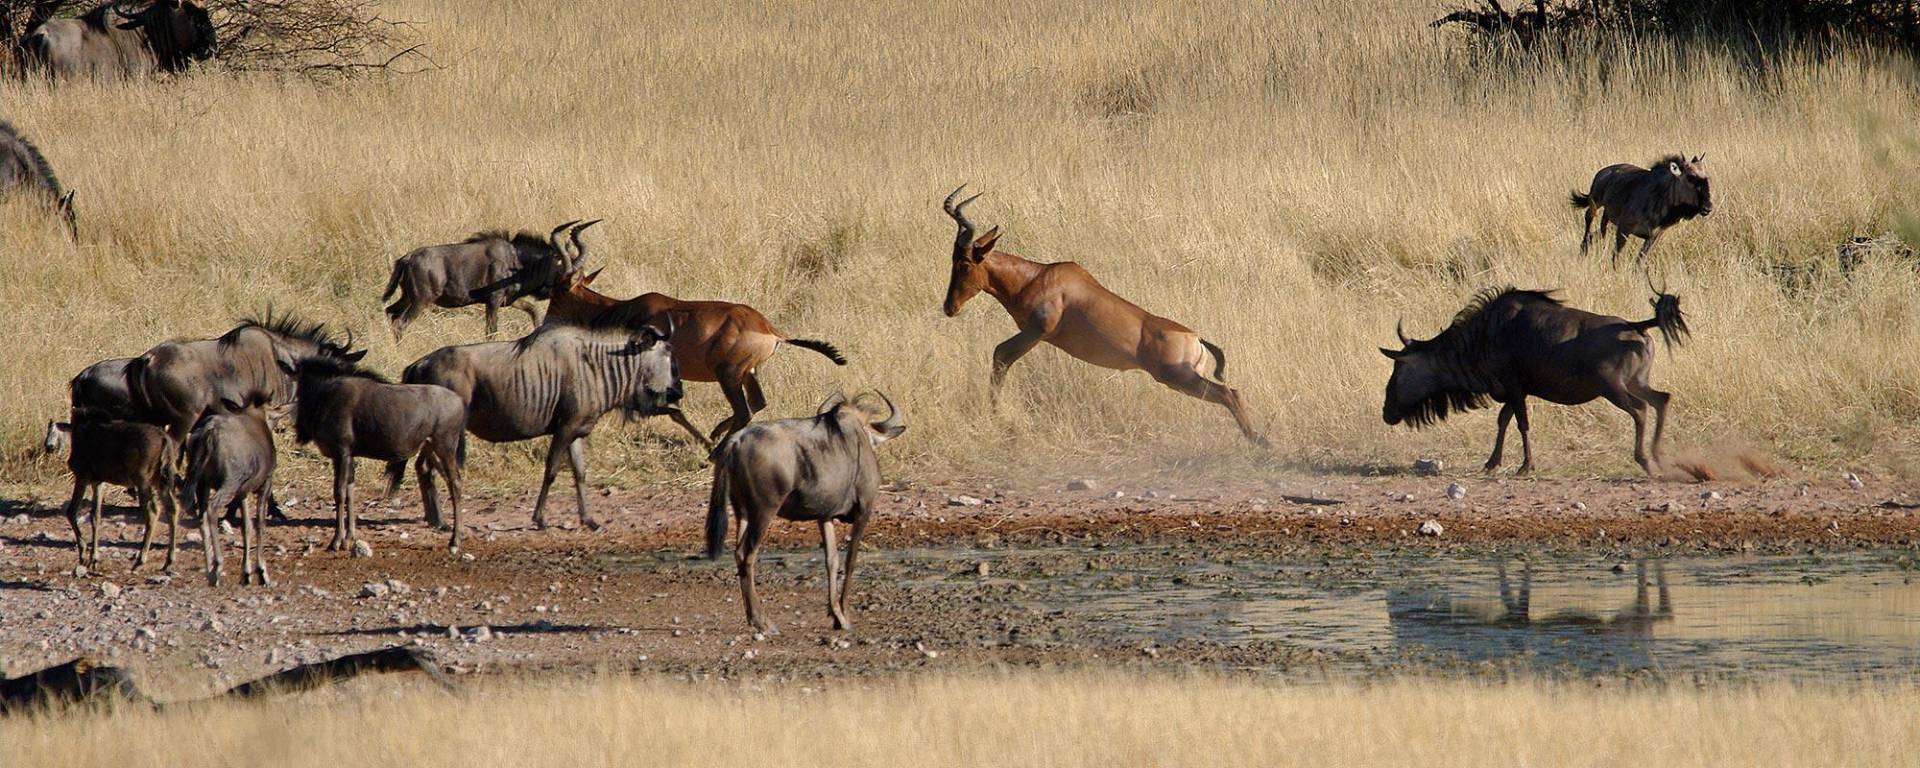 Red hartebeest and wildebeest at the pan